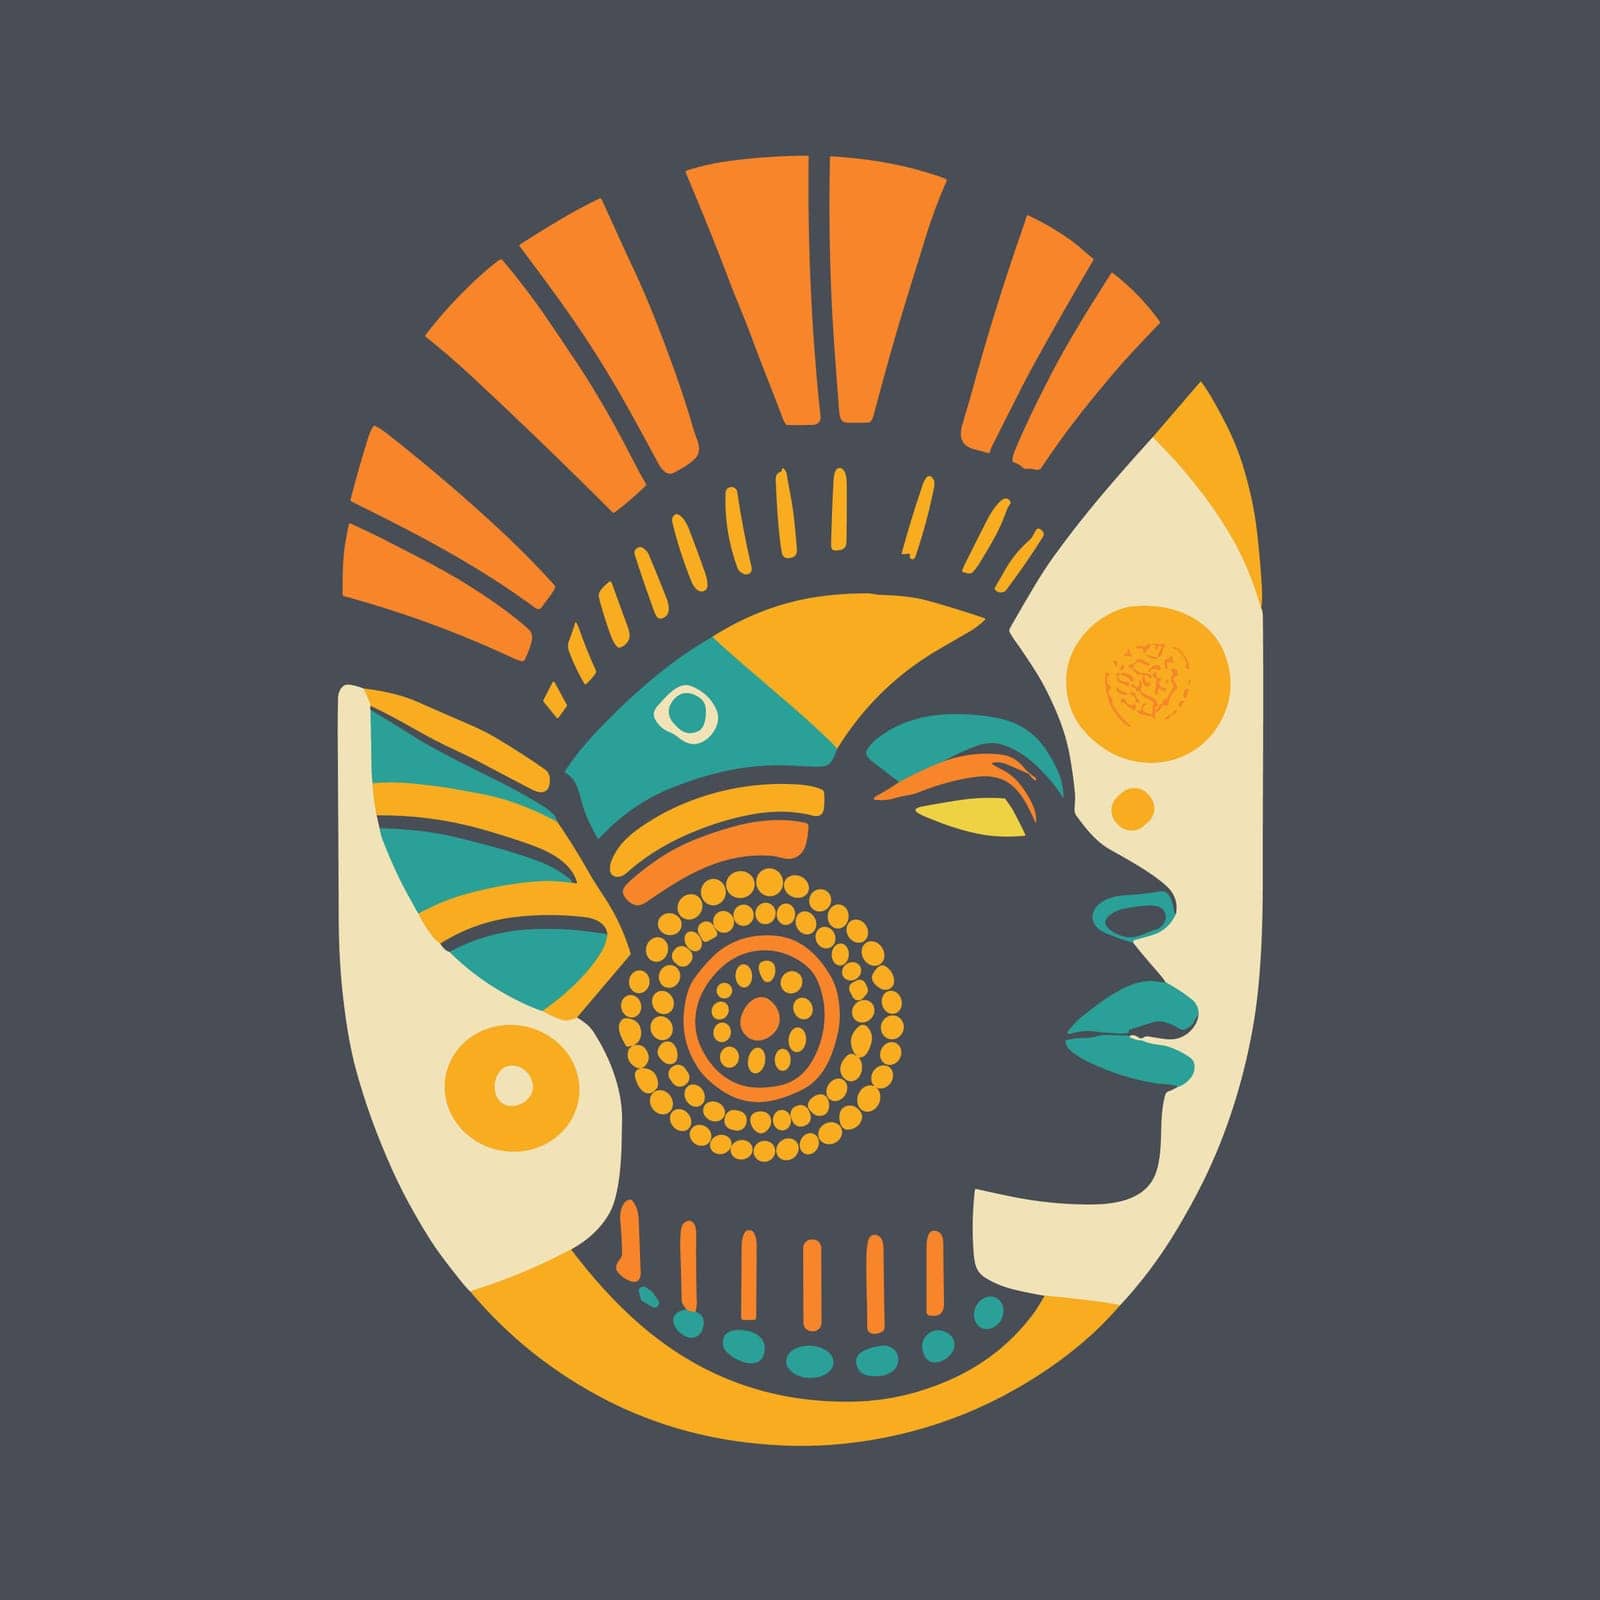 Minimalist Tshirt or Logo Design Stylized Head with a Traditional African Hairstyle and Jewelry, Abstract Art in Orange Yellow Emerald White Colors, Graffiti, using Negative Space